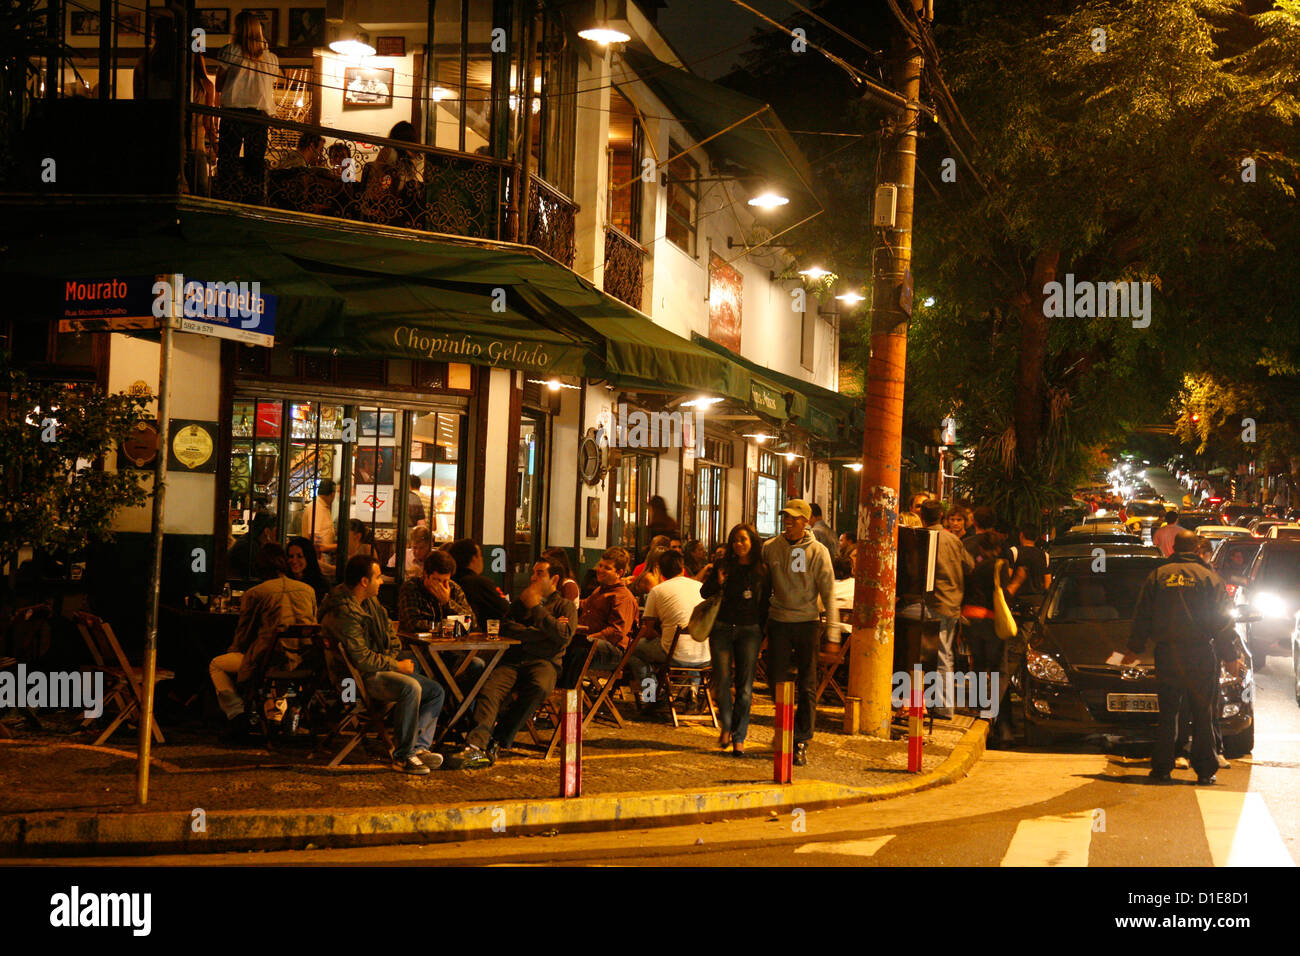 People in the Vila Madalena area known for its bars, restaurants and nighlife, Sao Paulo, Brazil, South America Stock Photo